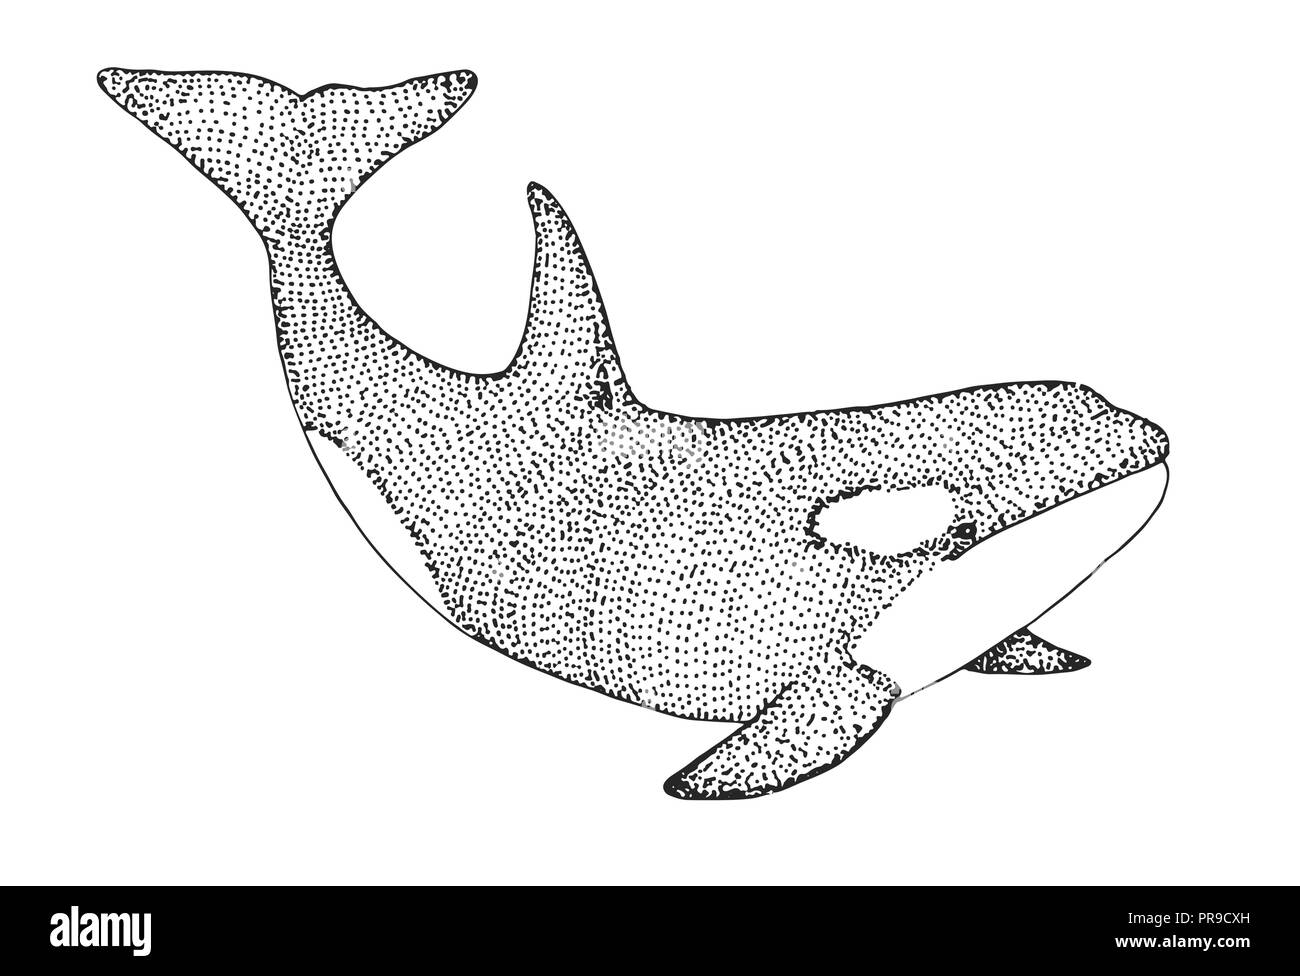 Whale Drawing Tutorial - How to draw Whale step by step